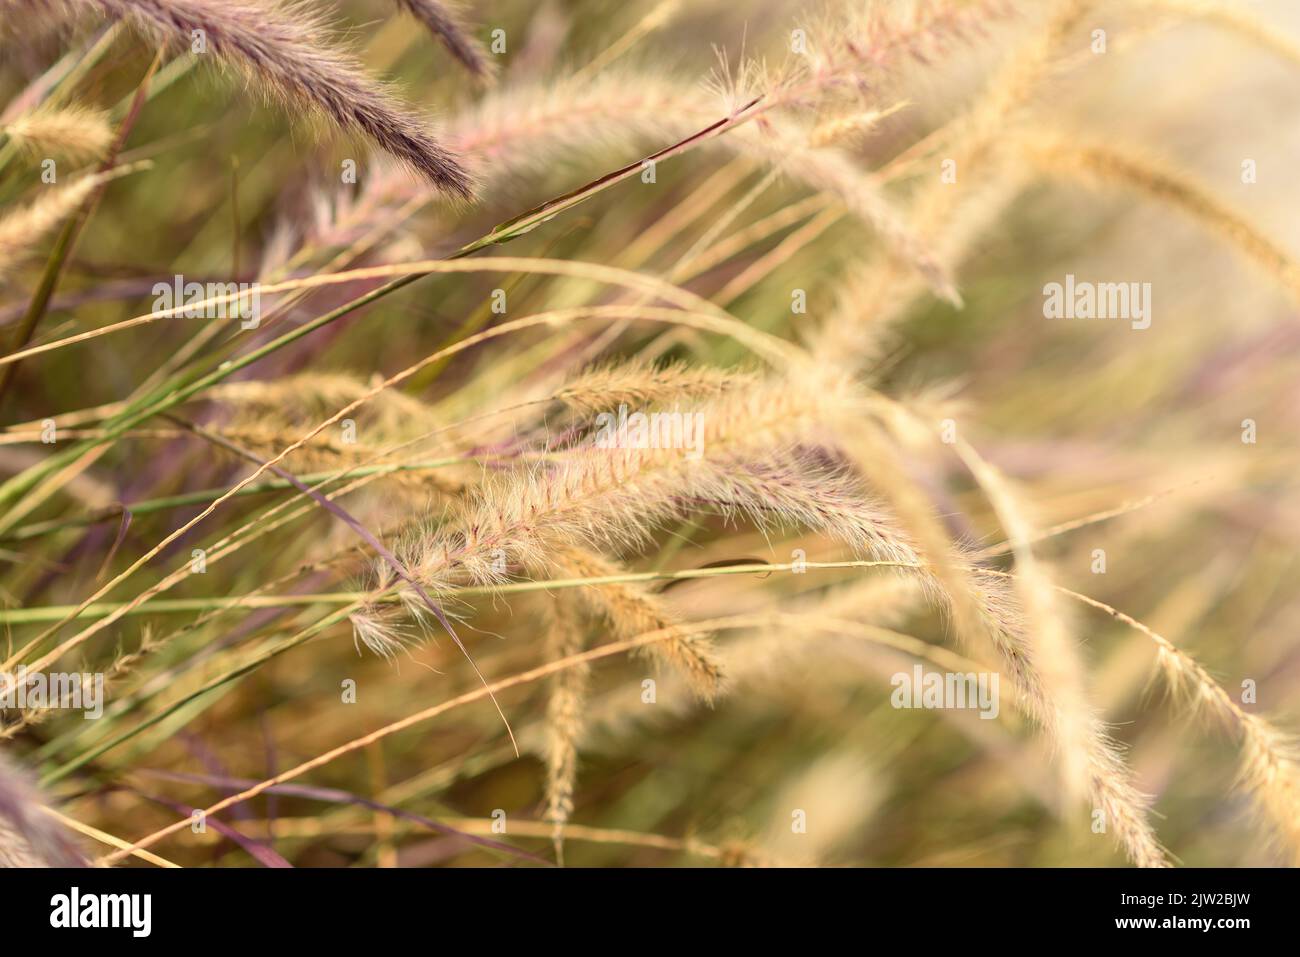 Pampas Grass or Cortaderia selloana grows outdoor. Selective focus, blurred background. Stock Photo